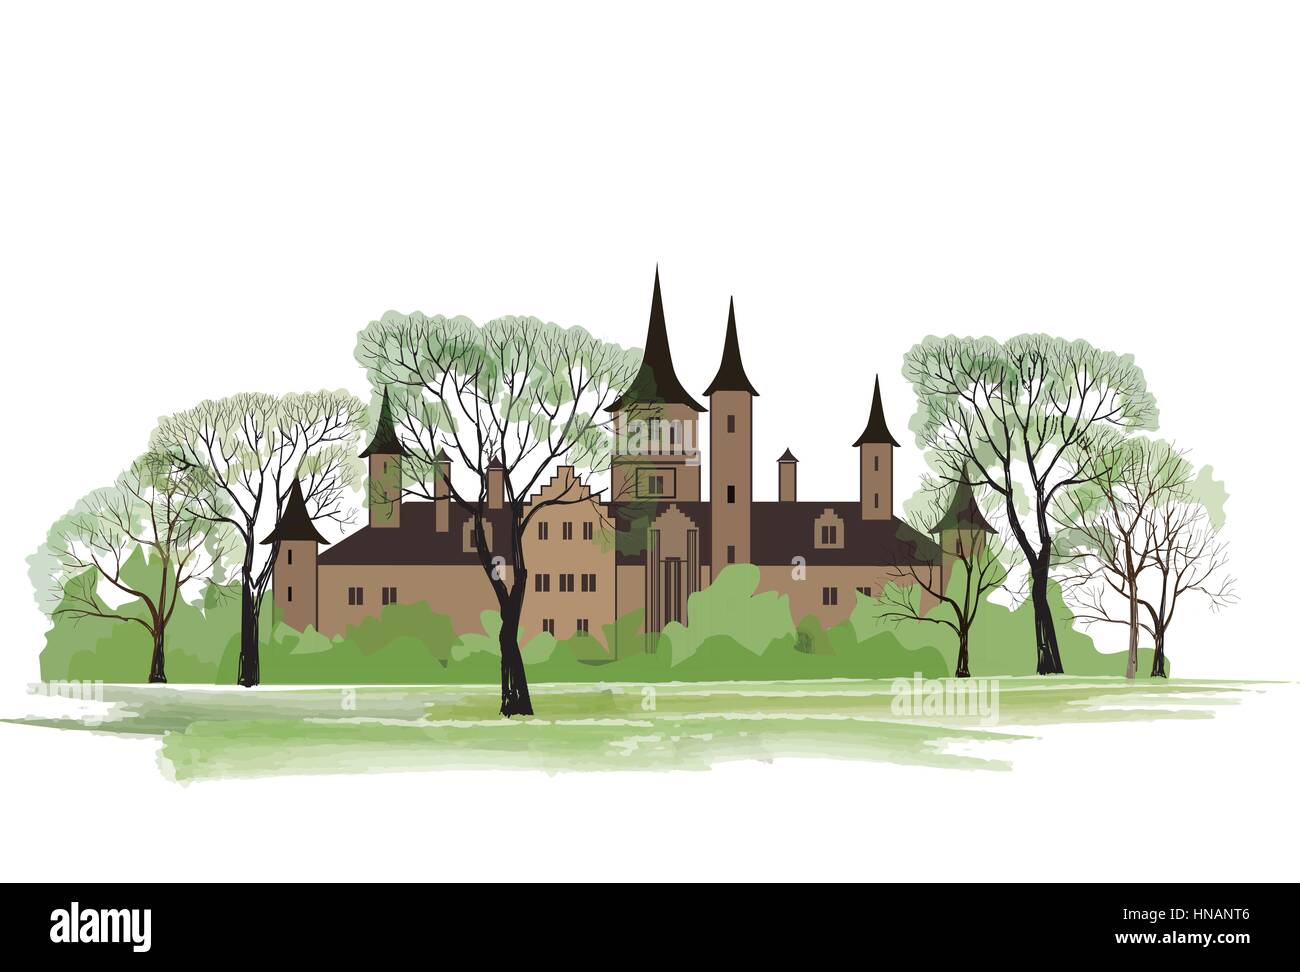 Old house in park. Spring landscape with ancient castle among trees. Stock Vector